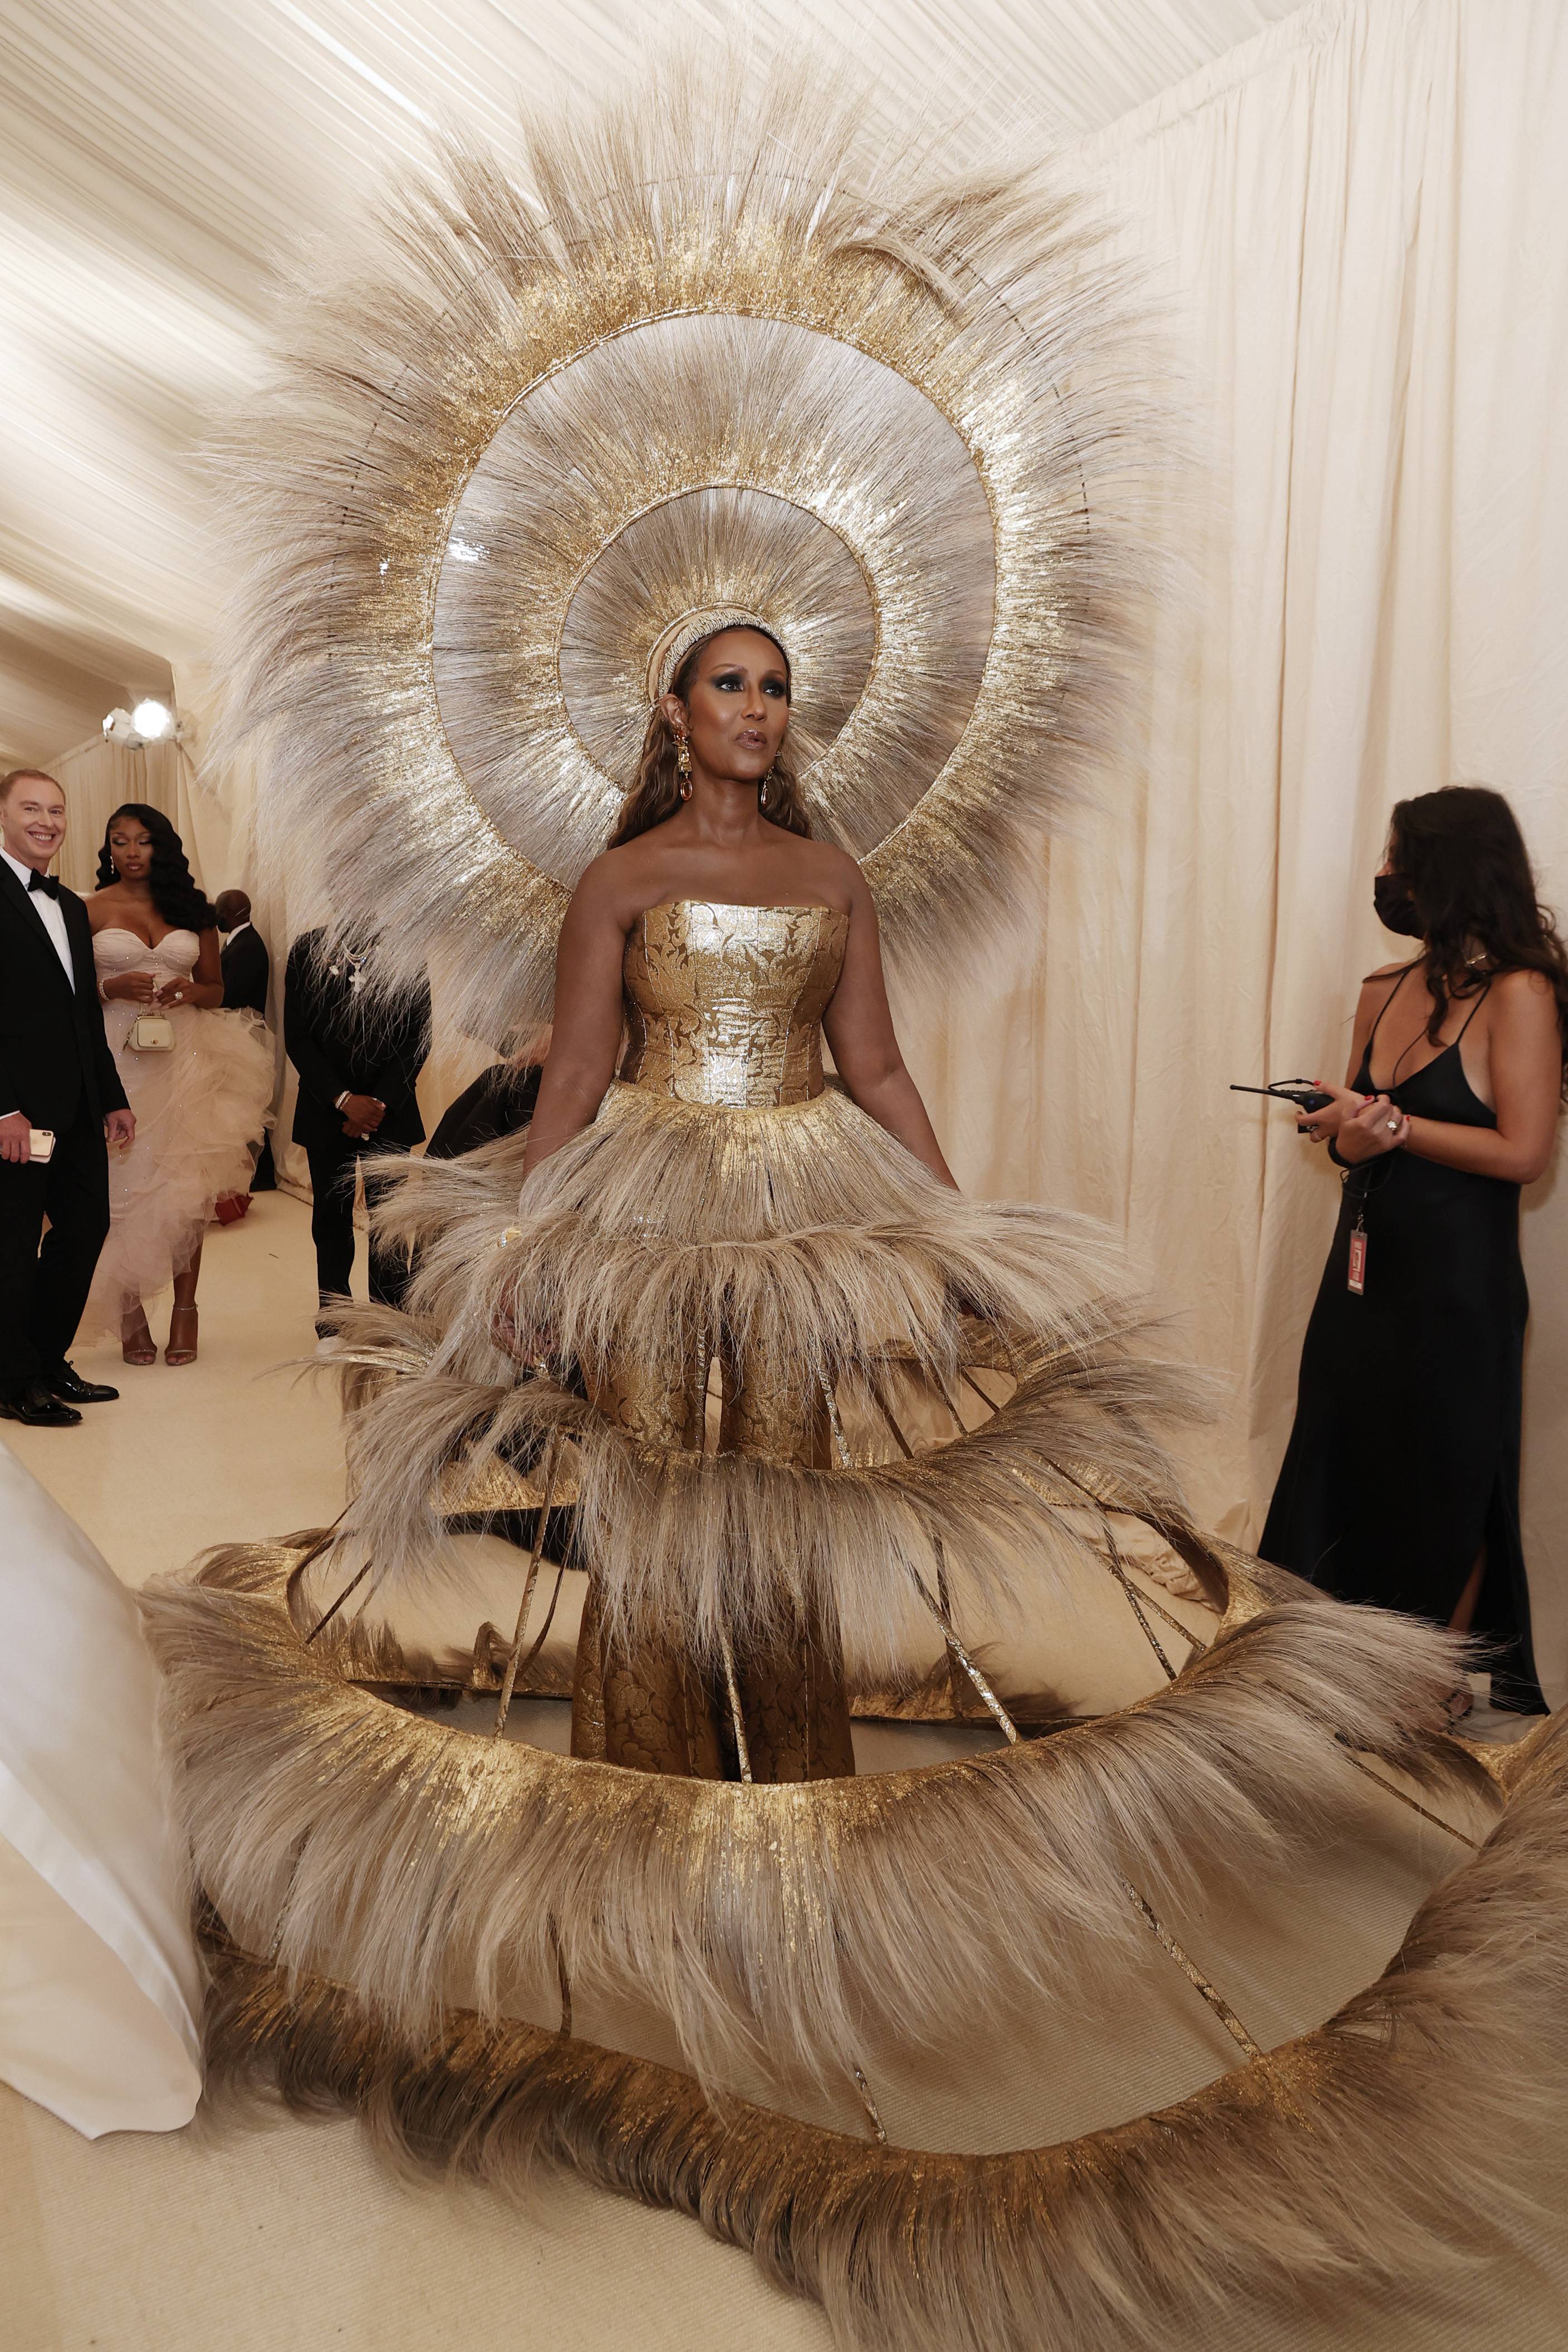 Iman A true Image 6 from MET GALA 2021 The Iconic Red Carpet